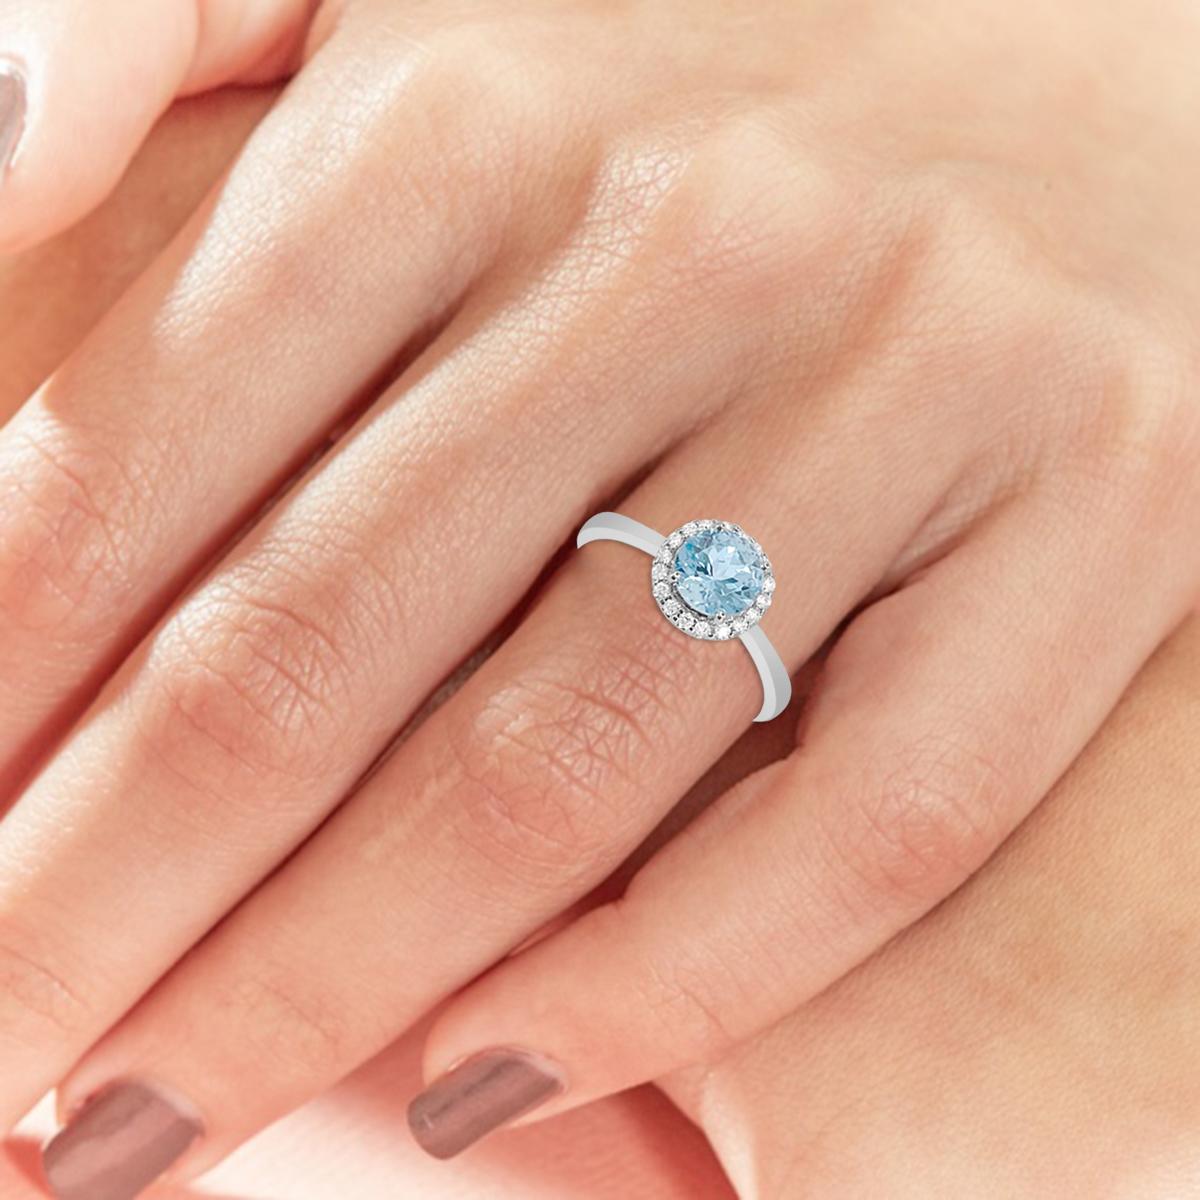 Oval Cut 14K White Gold 1.24cts Aquamarine and Diamond Ring, Style# TS1074AQR 21110/3 For Sale